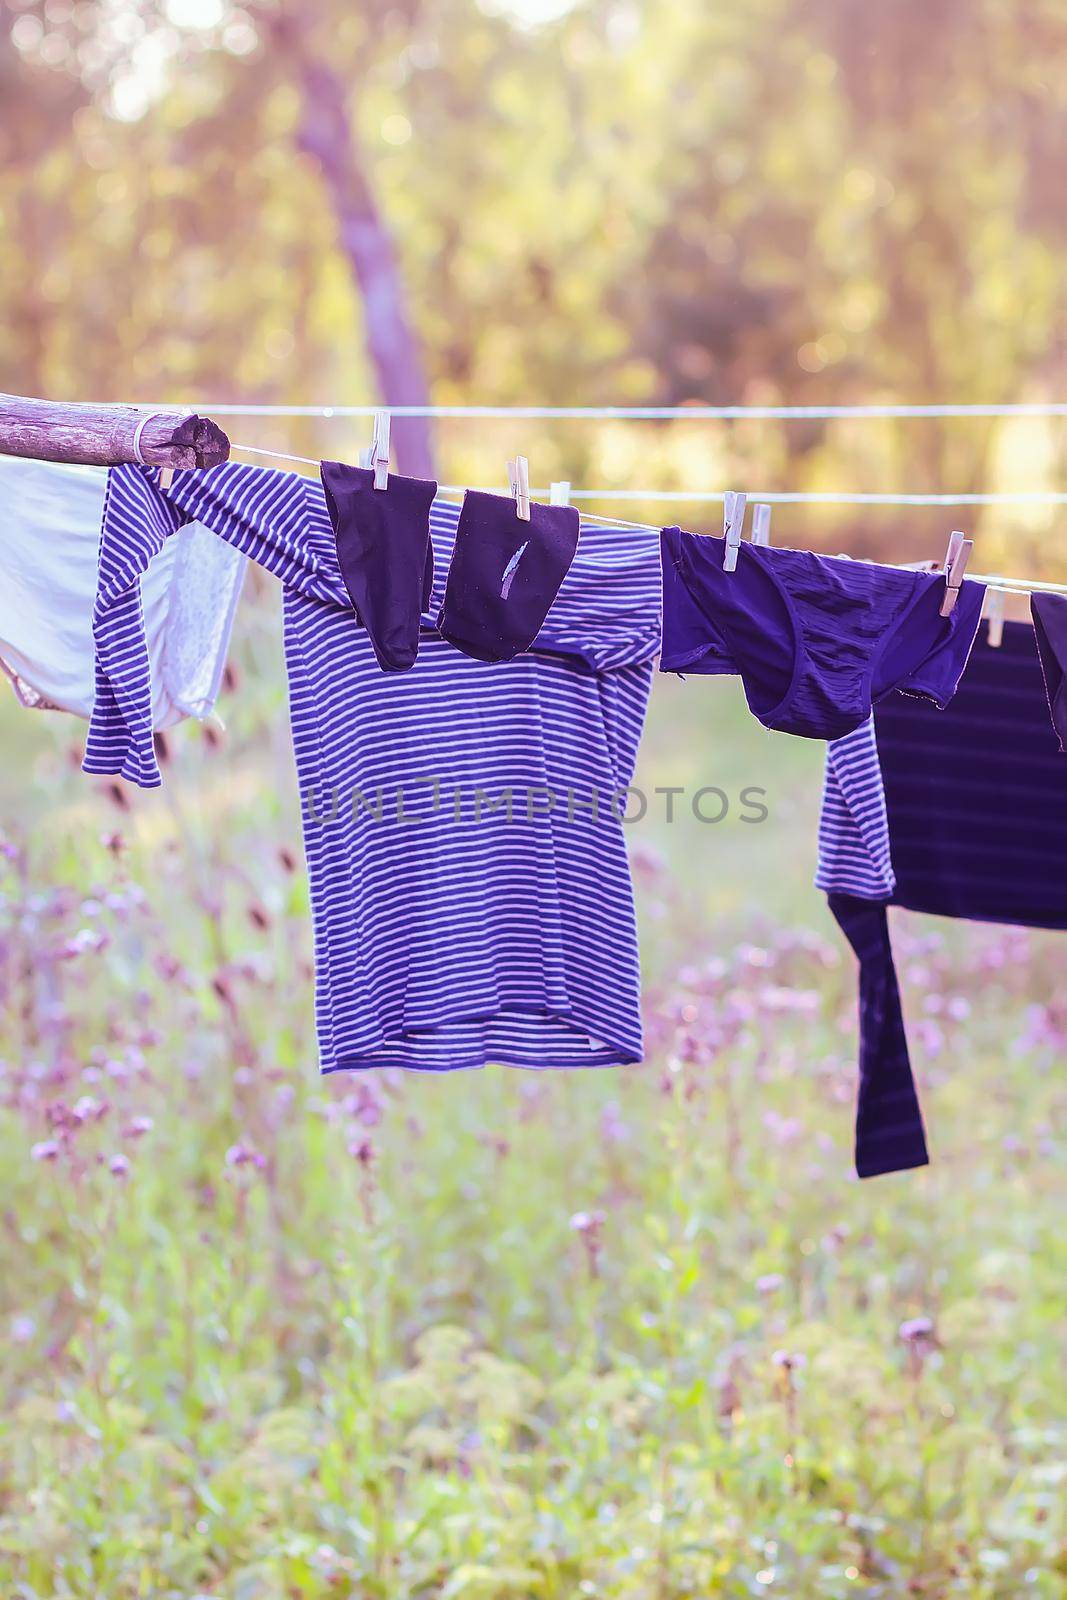 Washed colorful clothes hanging on a clothesline outdoors